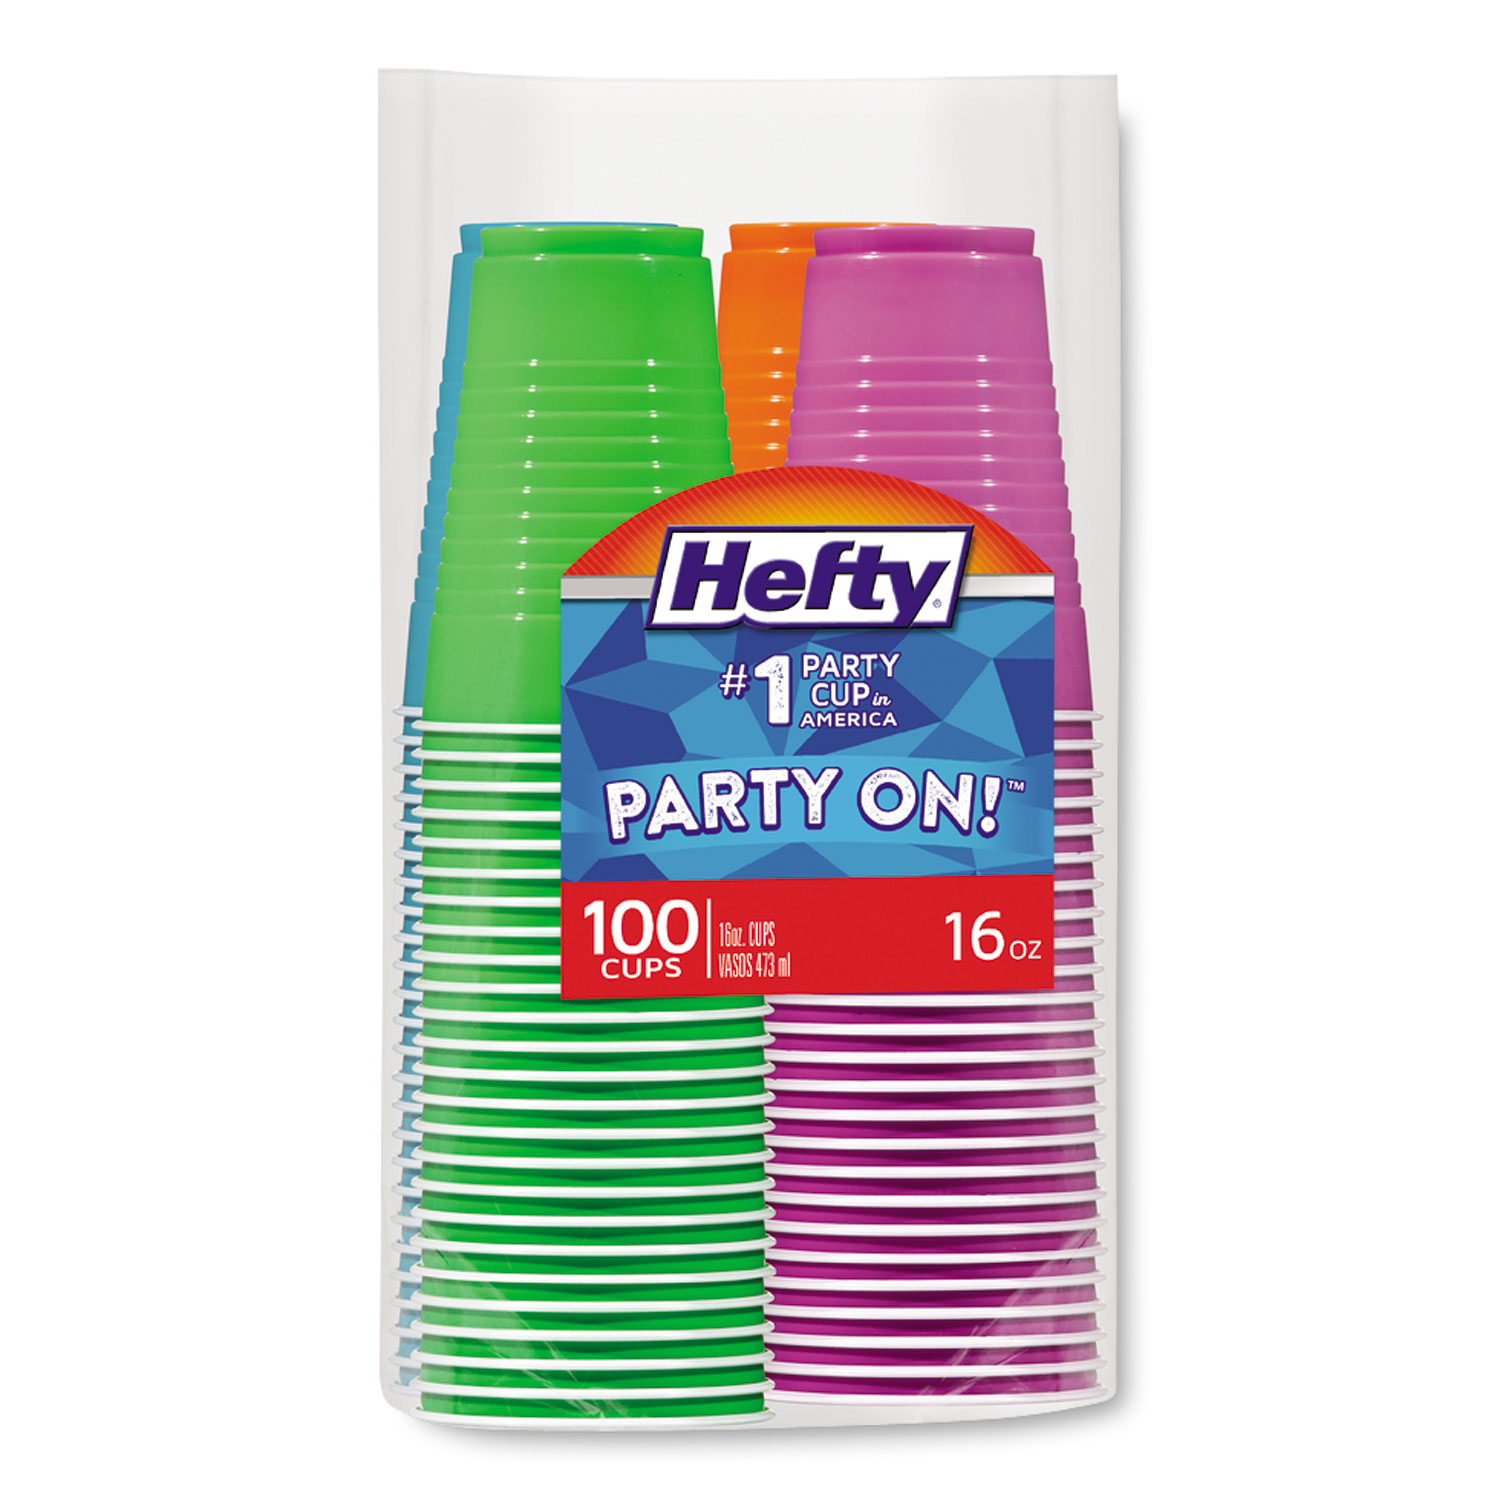  Hefty C21637 Easy Grip Disposable Plastic Party Cups, 16 oz, Assorted, 100/Pack, 4Pk/Carton (RFPC21637CT) 